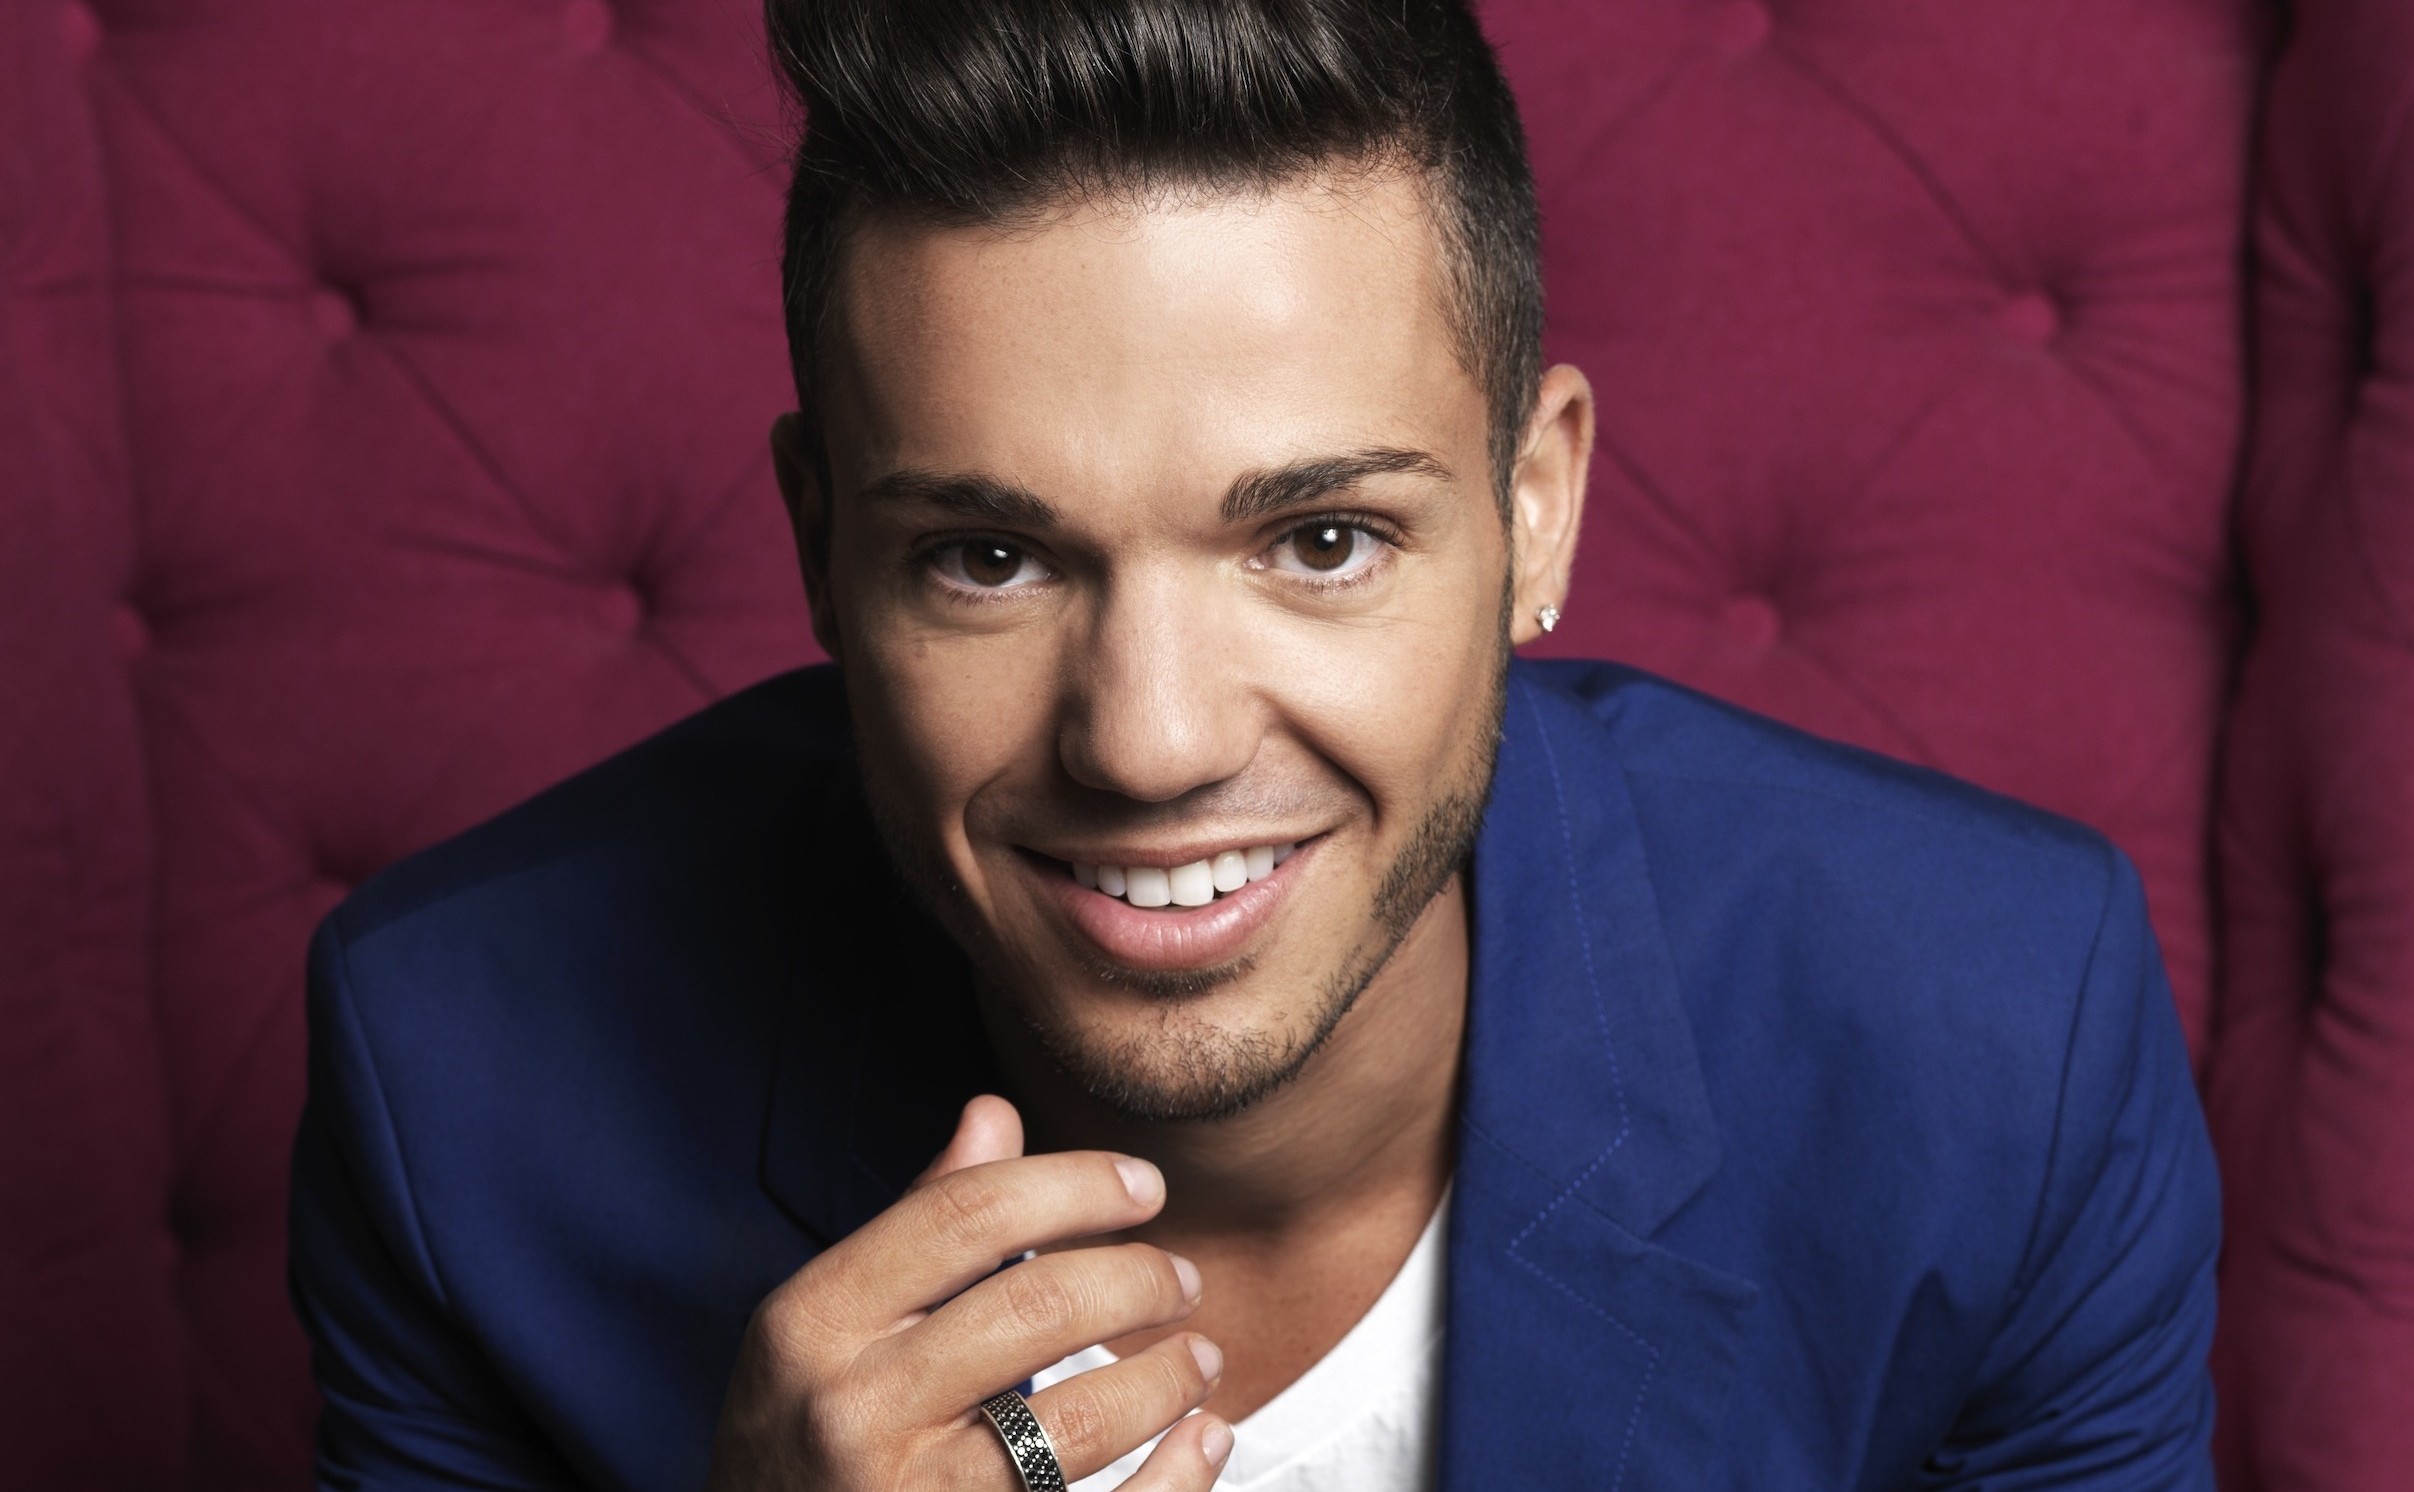 Anthony Callea Age, Height, Weight, Spouse, Net worth, Bio & Facts.